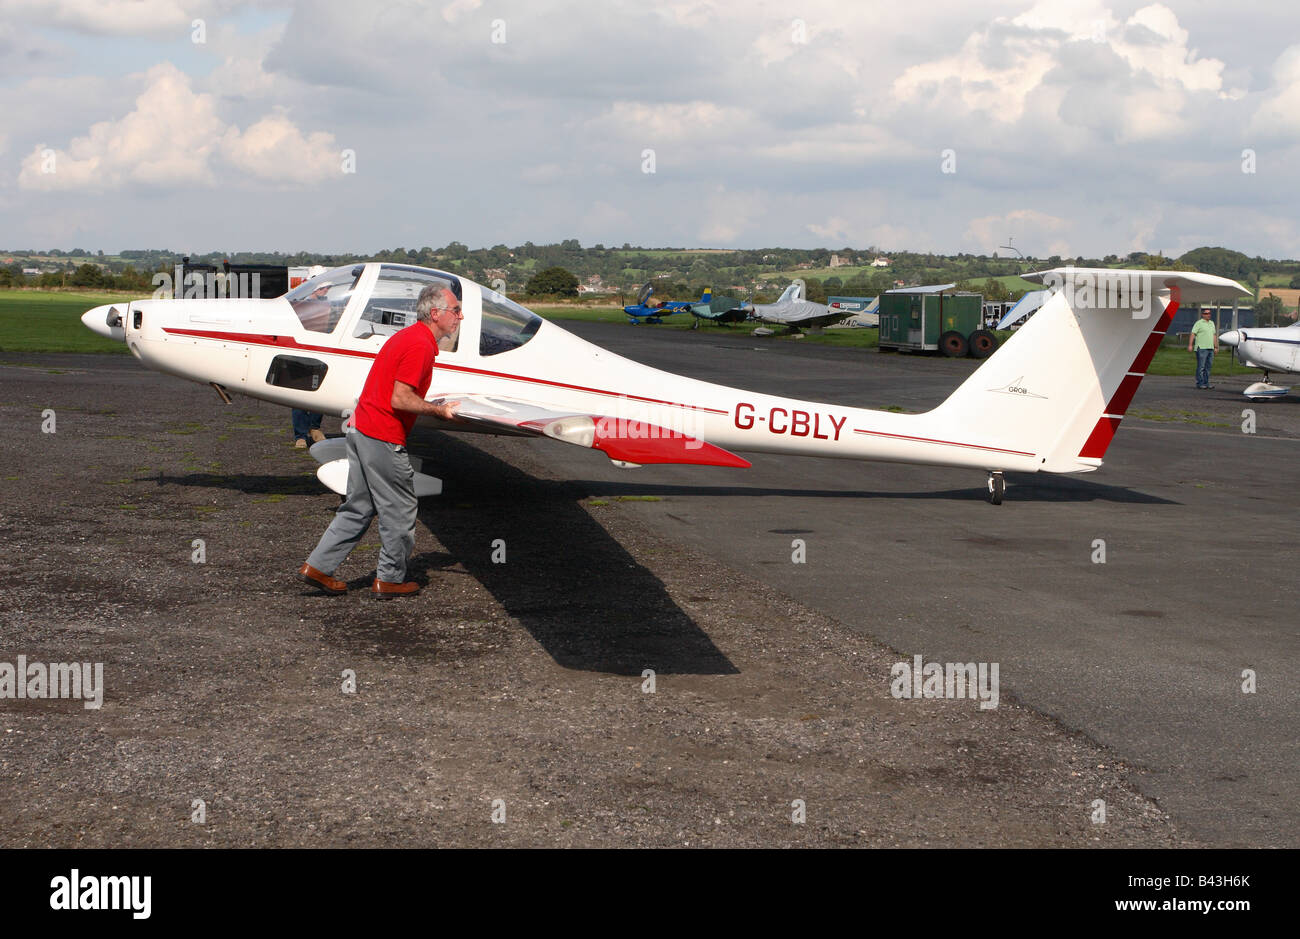 Grob G 109 motor glider motorglider being positioned at an airfield parking ramp apron. Stock Photo